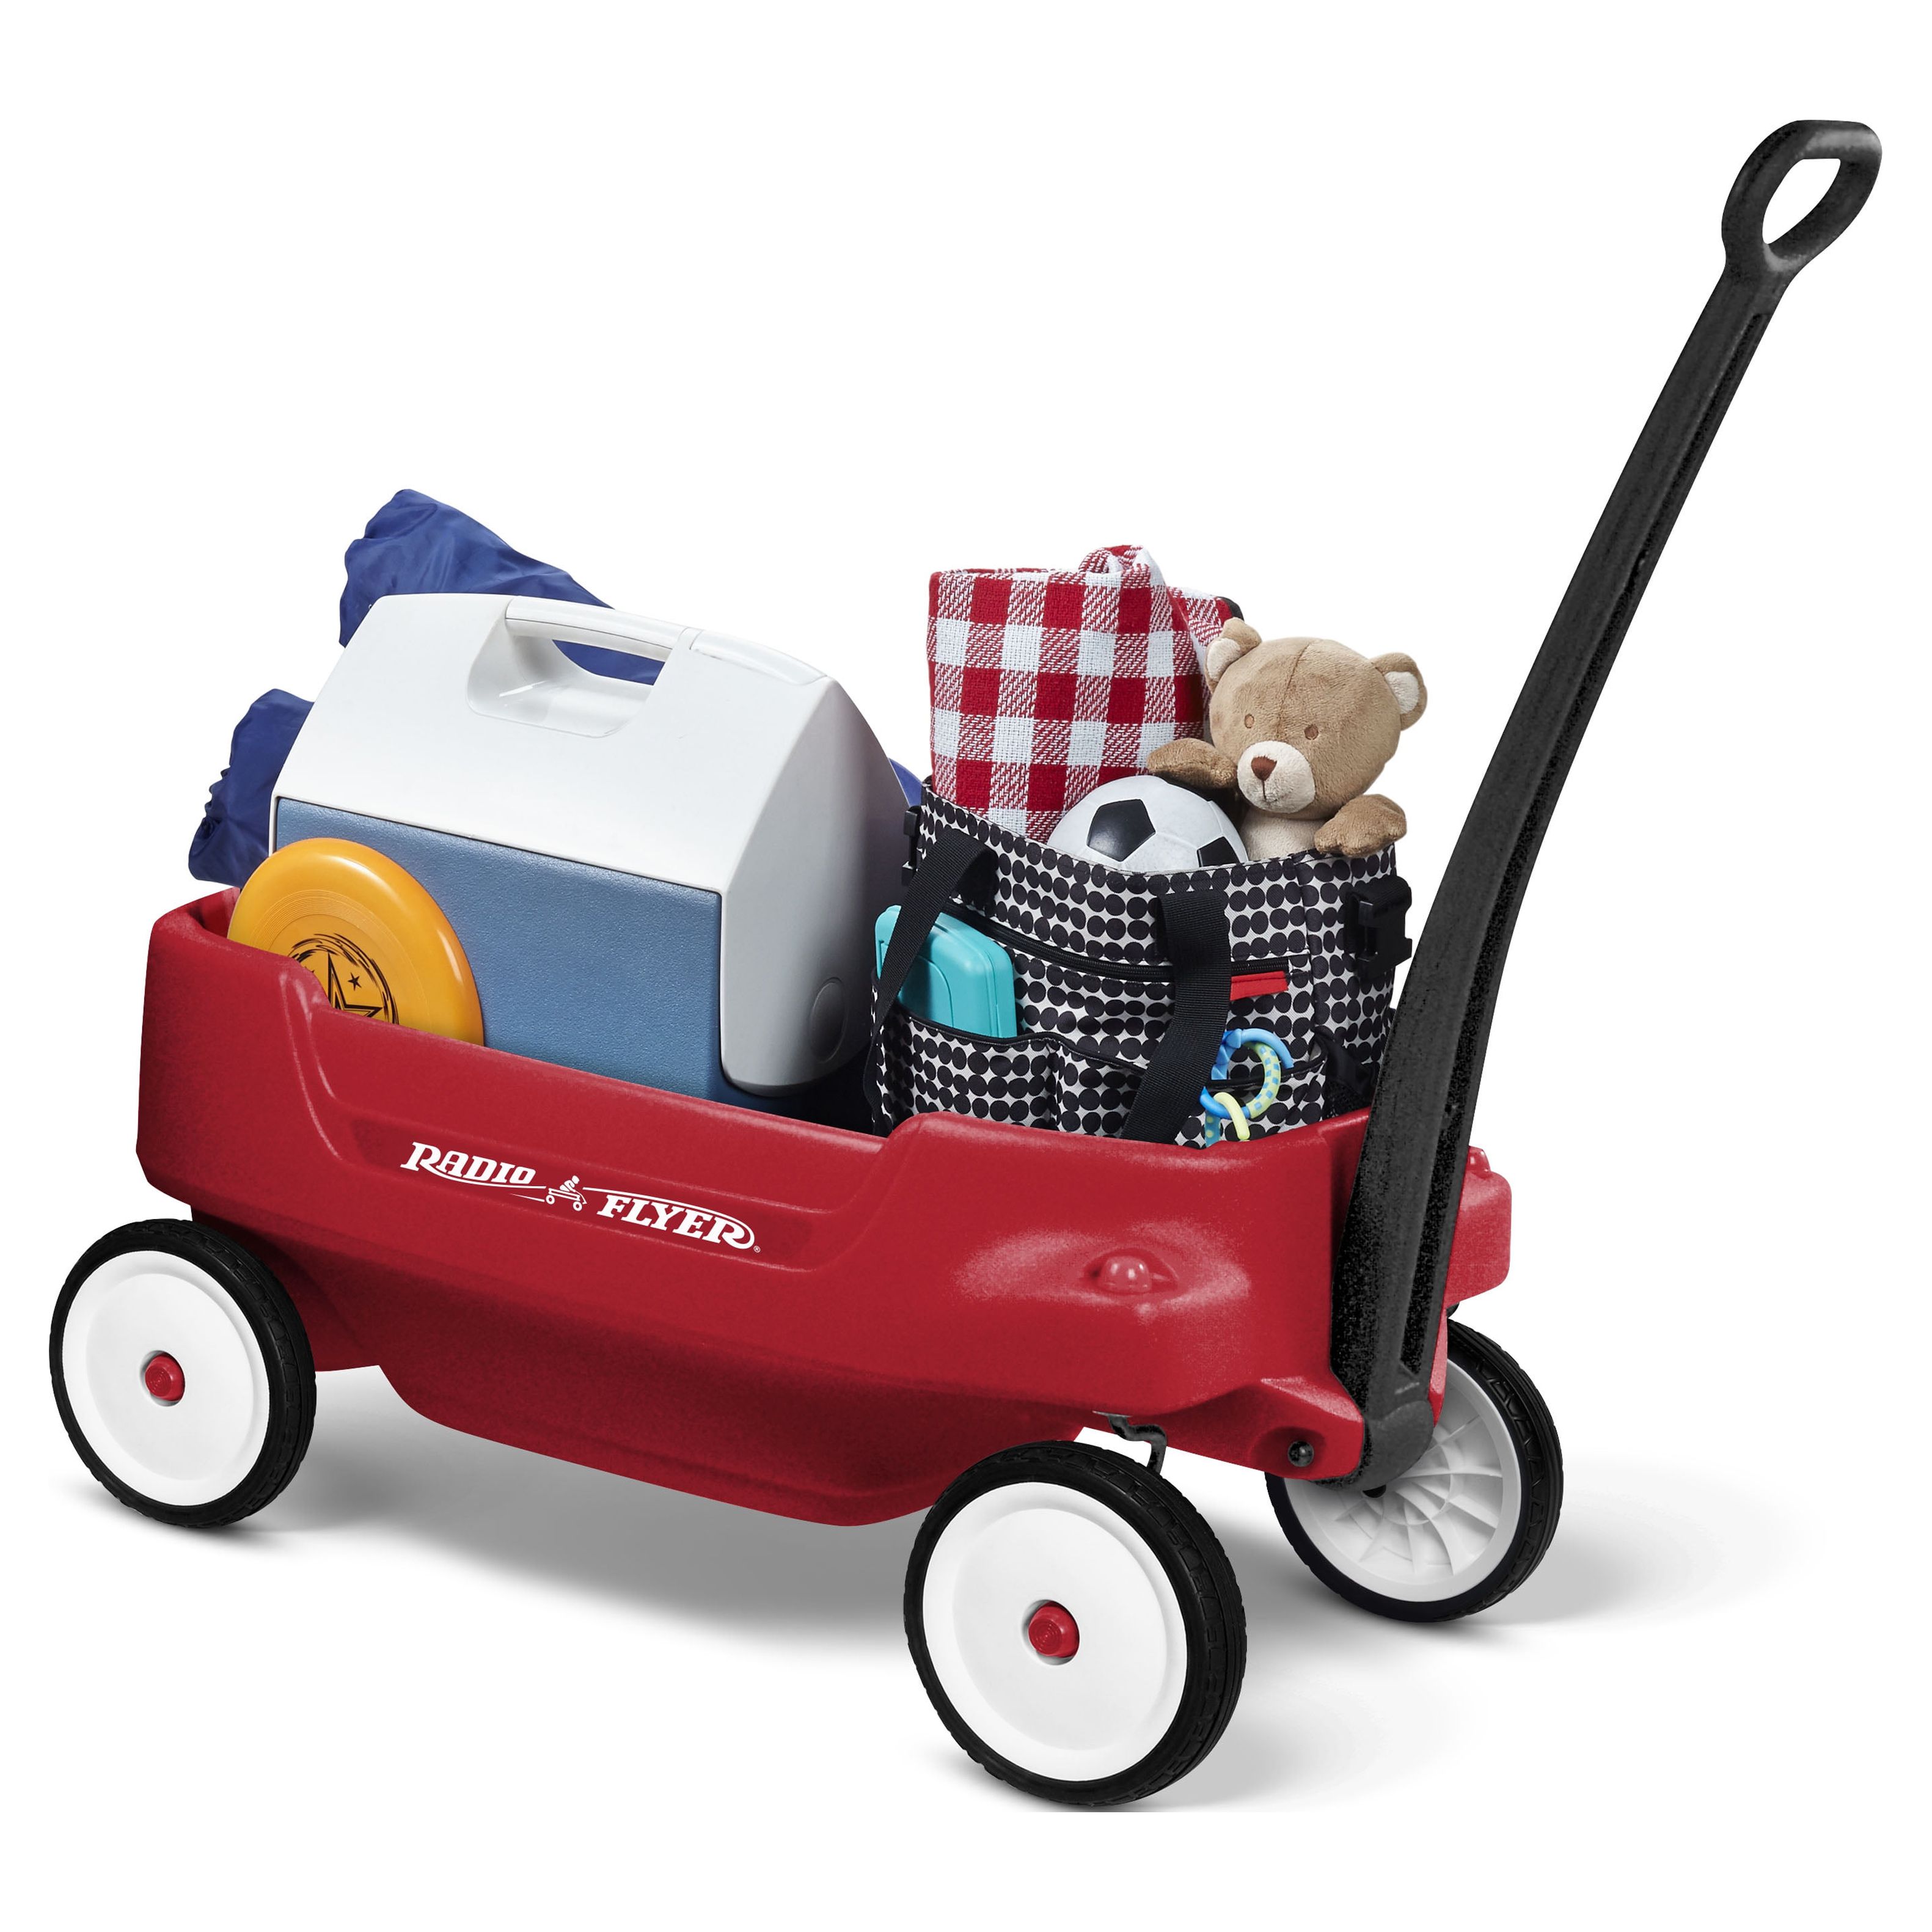 Radio Flyer, Pathfinder 2-in-1 Wagon, Folding Seats, Red - image 3 of 9